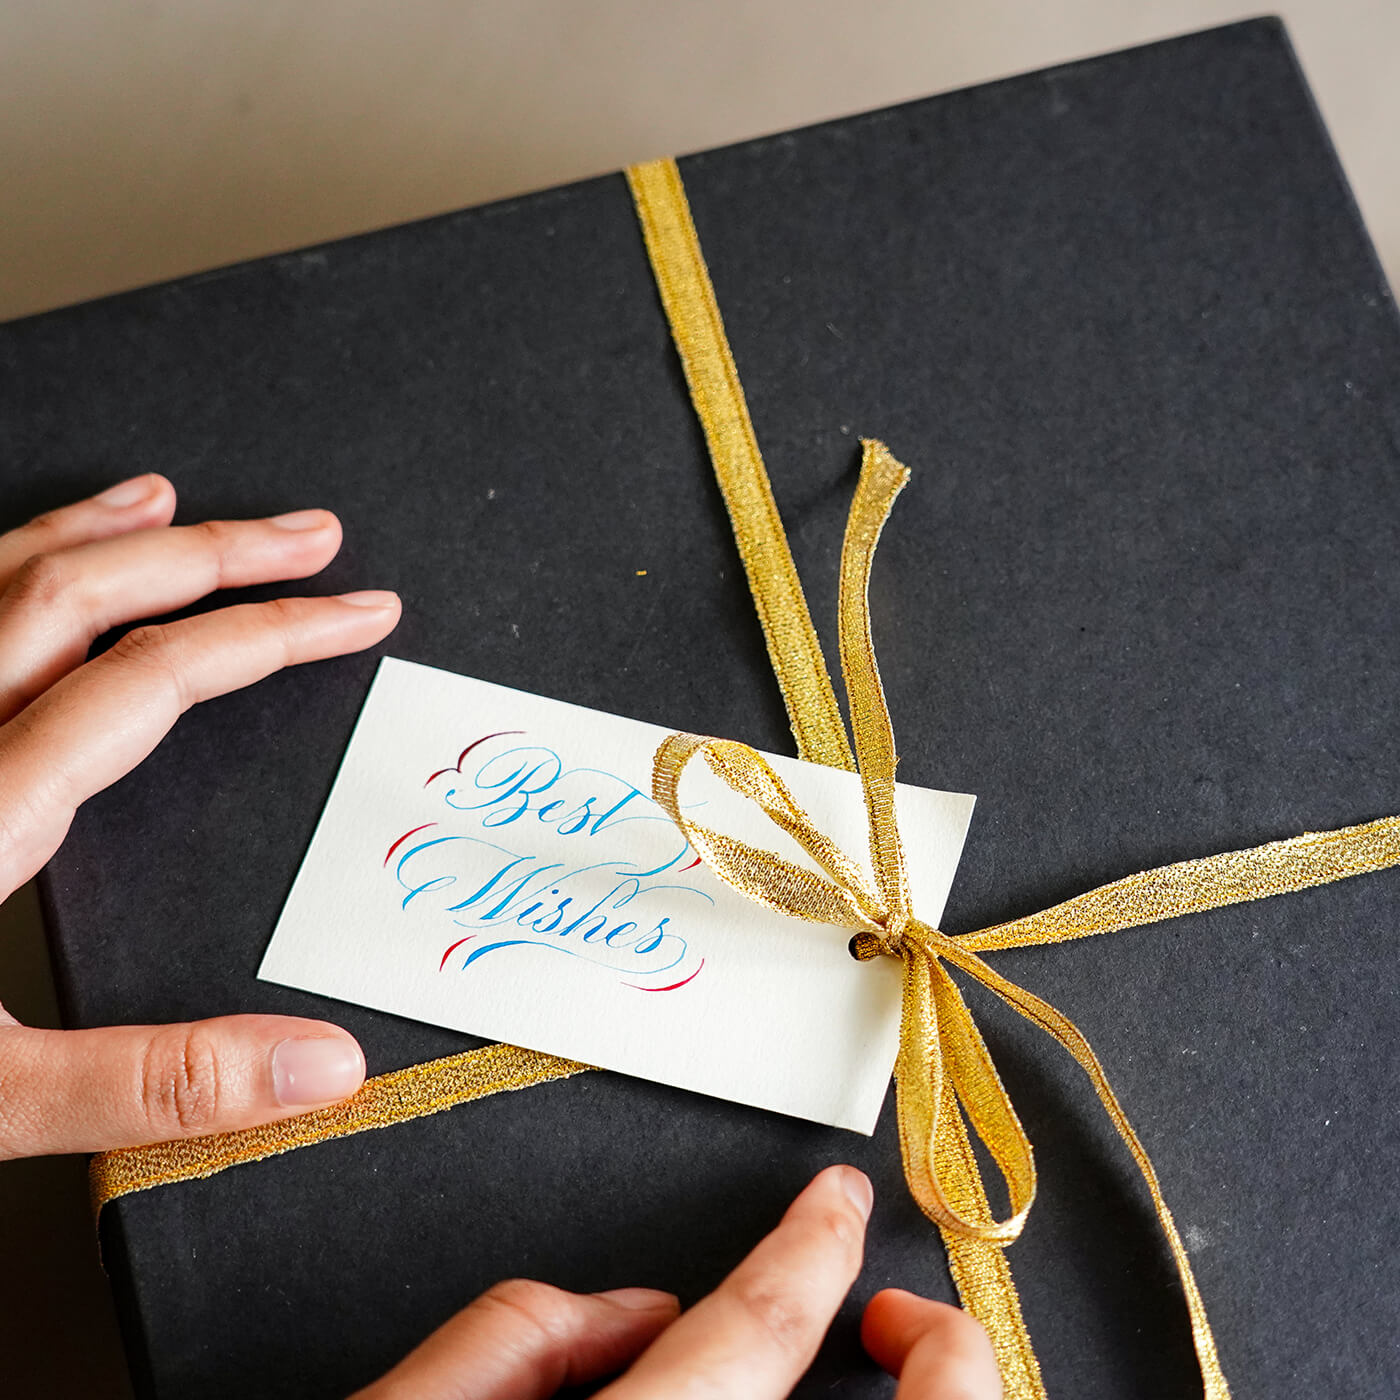 Online Gift Delivery - Just 4 You Surprise Planners